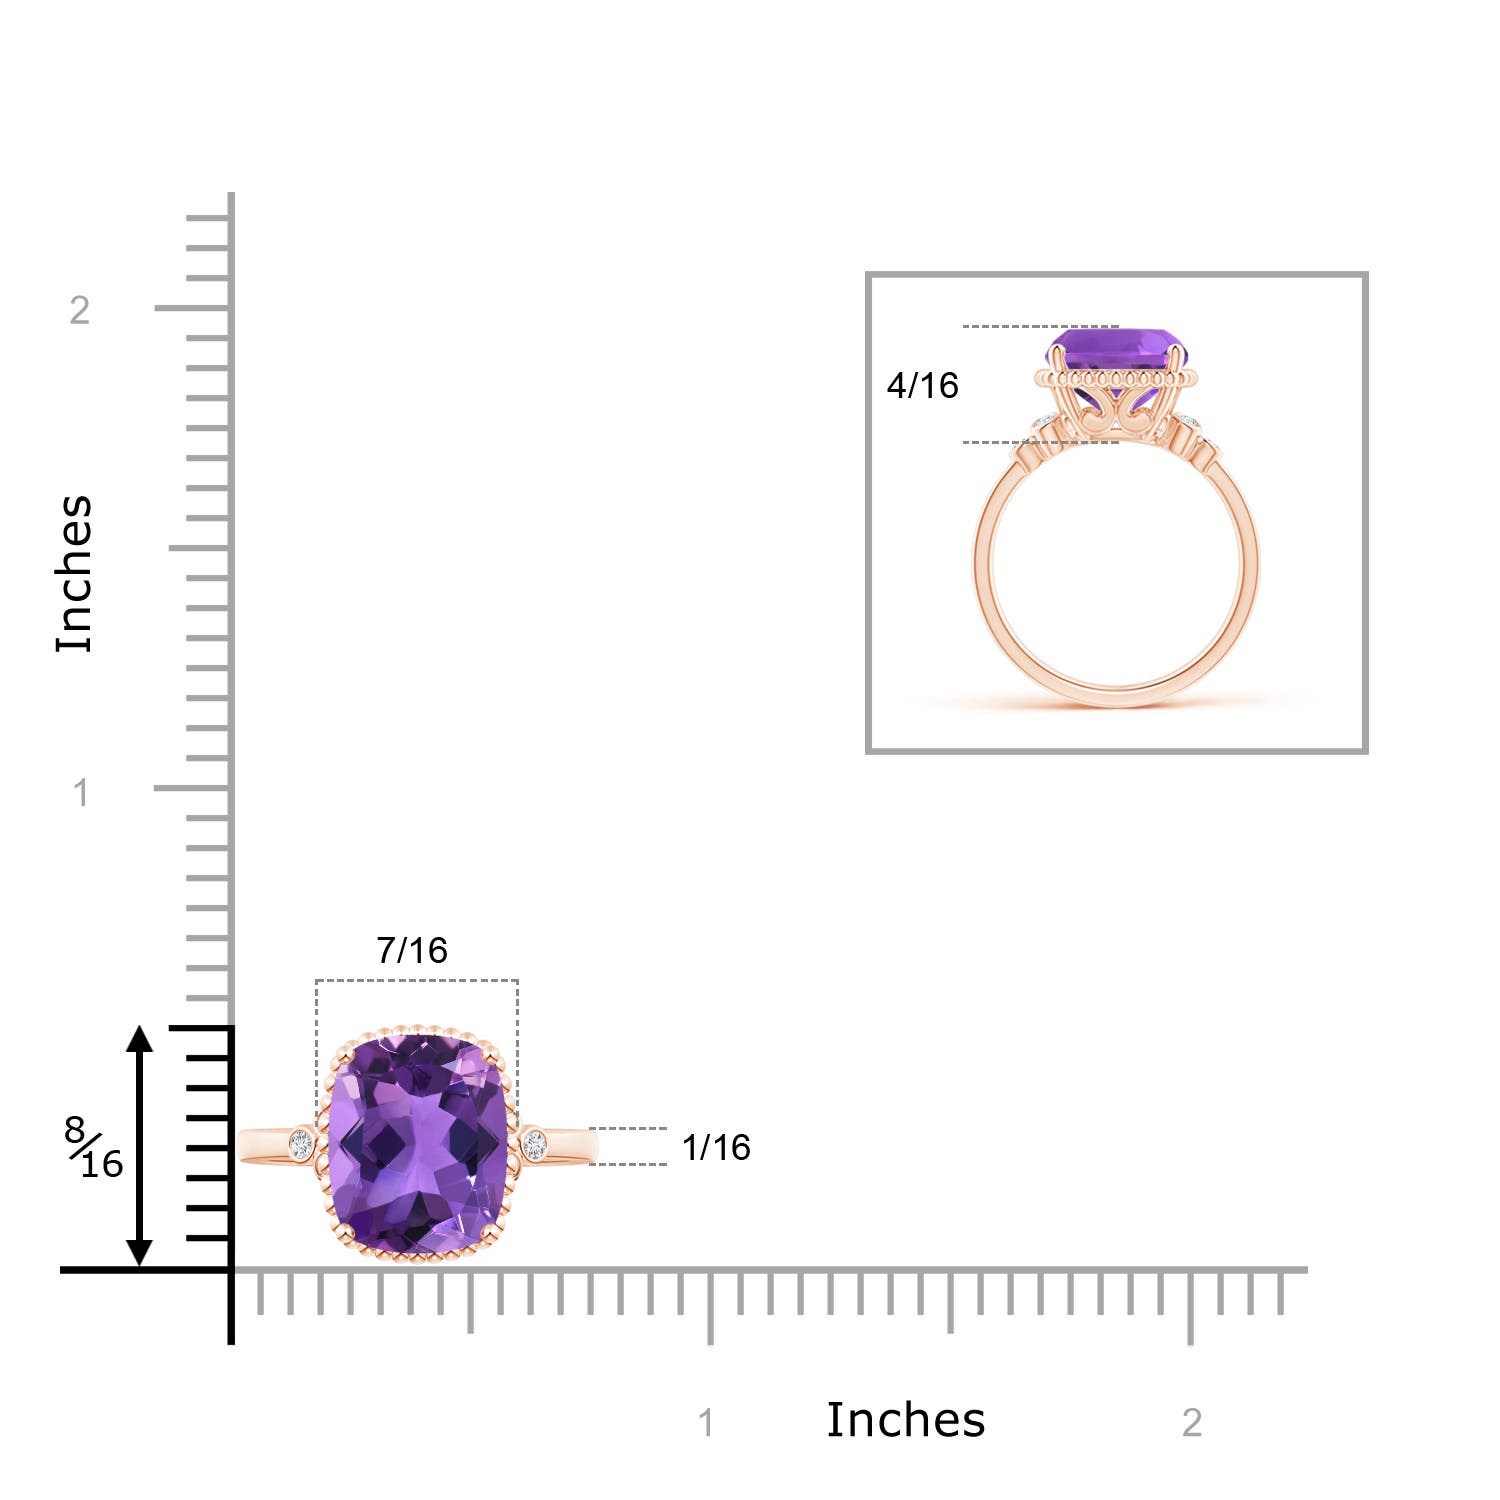 AAA - Amethyst / 3.58 CT / 14 KT Rose Gold